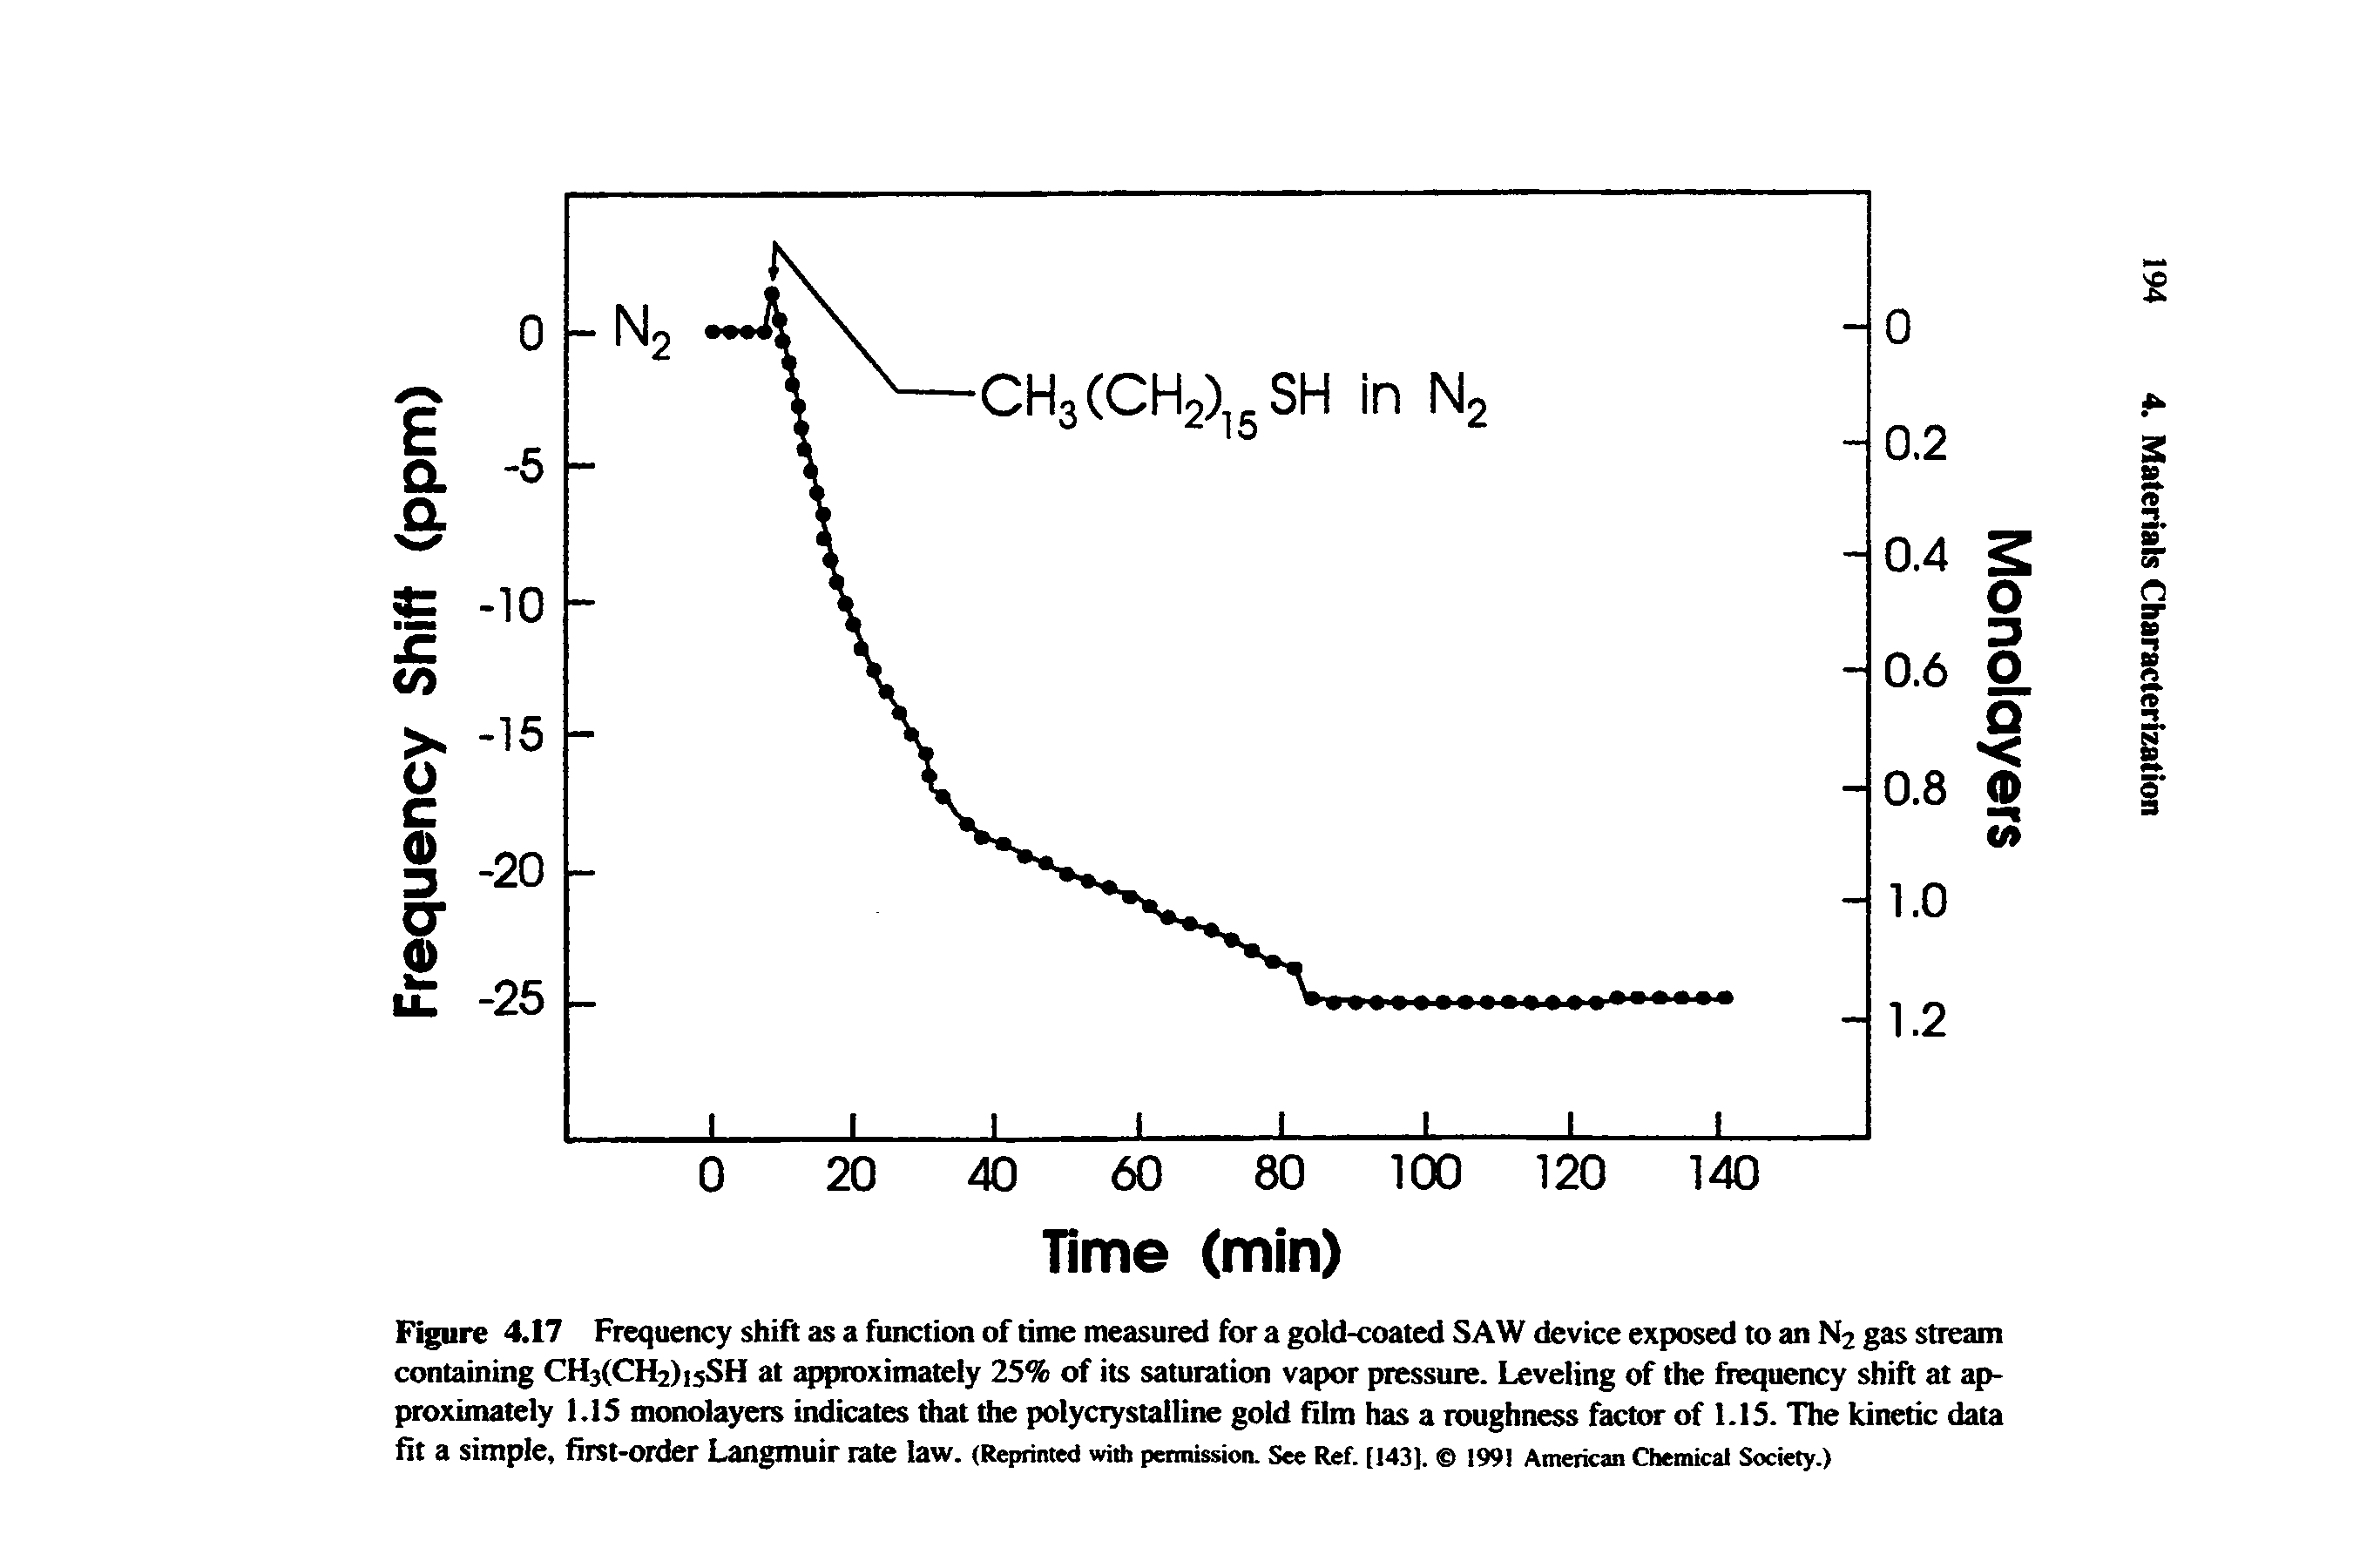 Figure 4.17 Frequency shift as a function of time measured for a gold-coated SAW device exposed to an Na gas stream containing CH3(CH2)isSH at tproximately 25% of its saturation vapor pressure. Leveling of the frequency shift at approximately 1.15 monolayers indicates that the polycrystalline gold Him has a roughness factor of 1.15. The kinetic data fit a simple, first-order Langmuir rate law. (Reprinted with permission. See Ref. [143J. 1991 American Chemical Society.)...